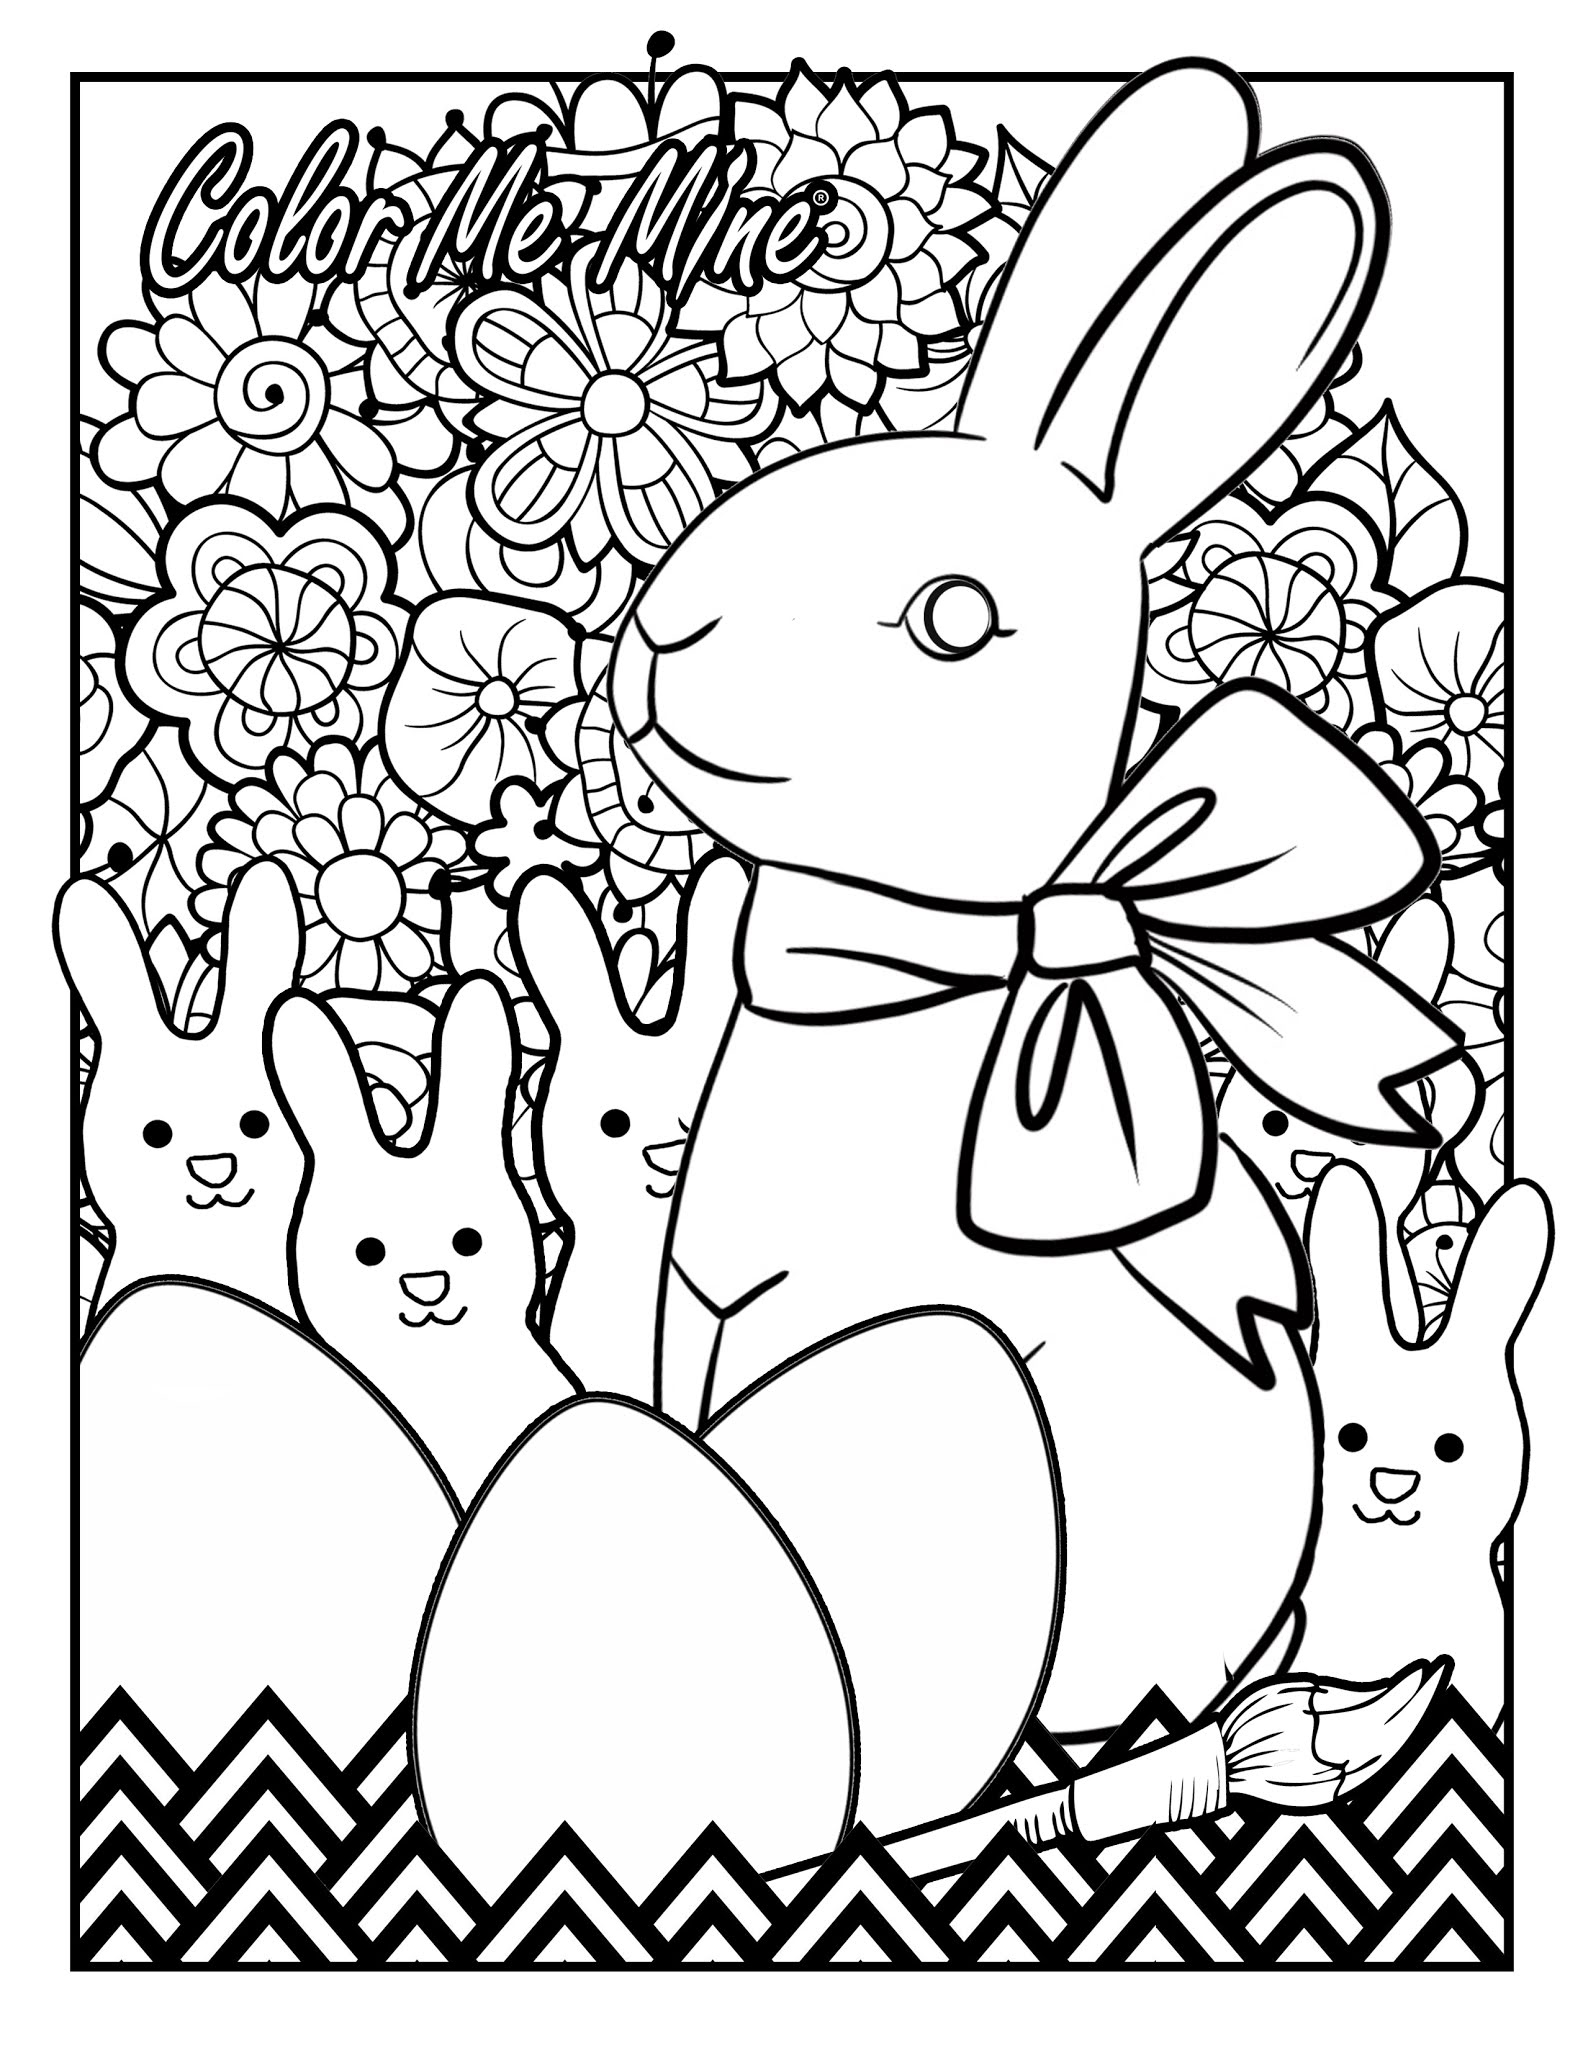 *NEW* Easter Coloring Page – South Miami